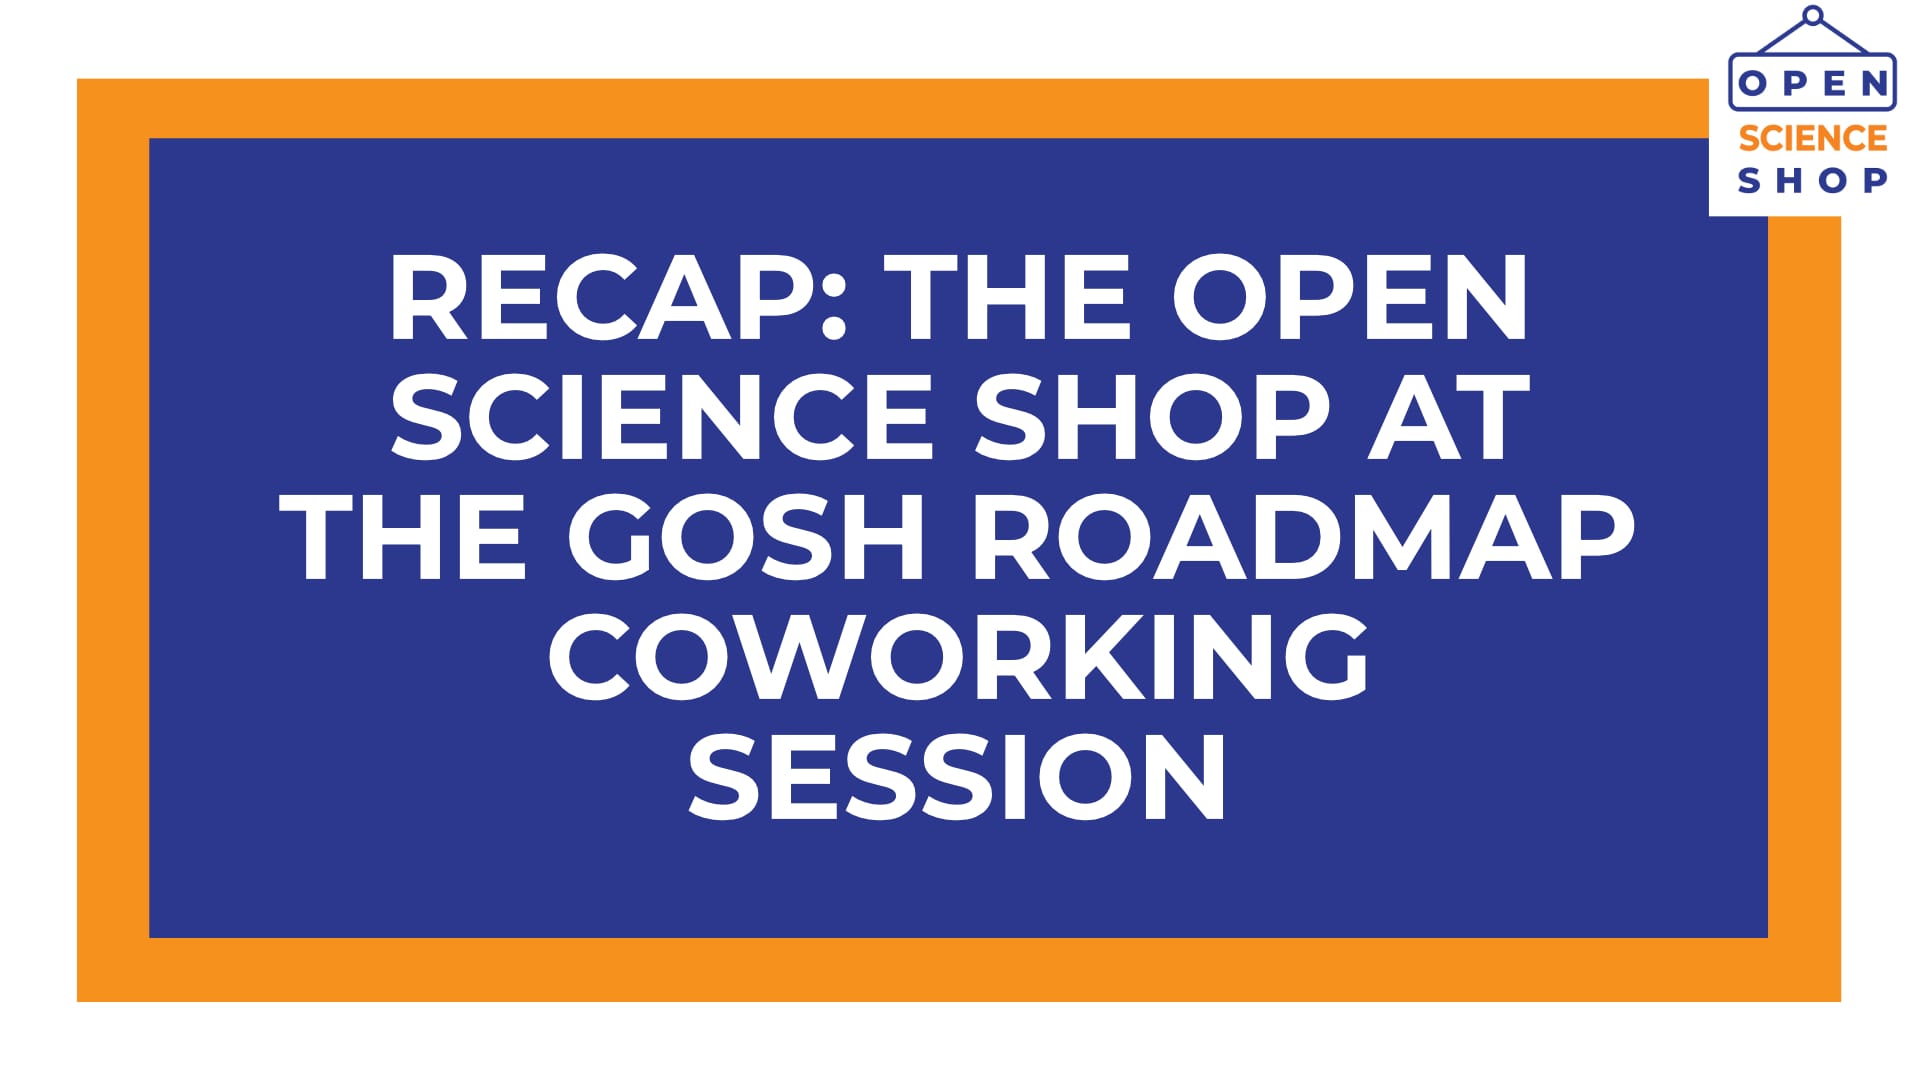 Recap: Open Science Shop at the GOSH Roadmap coworking session